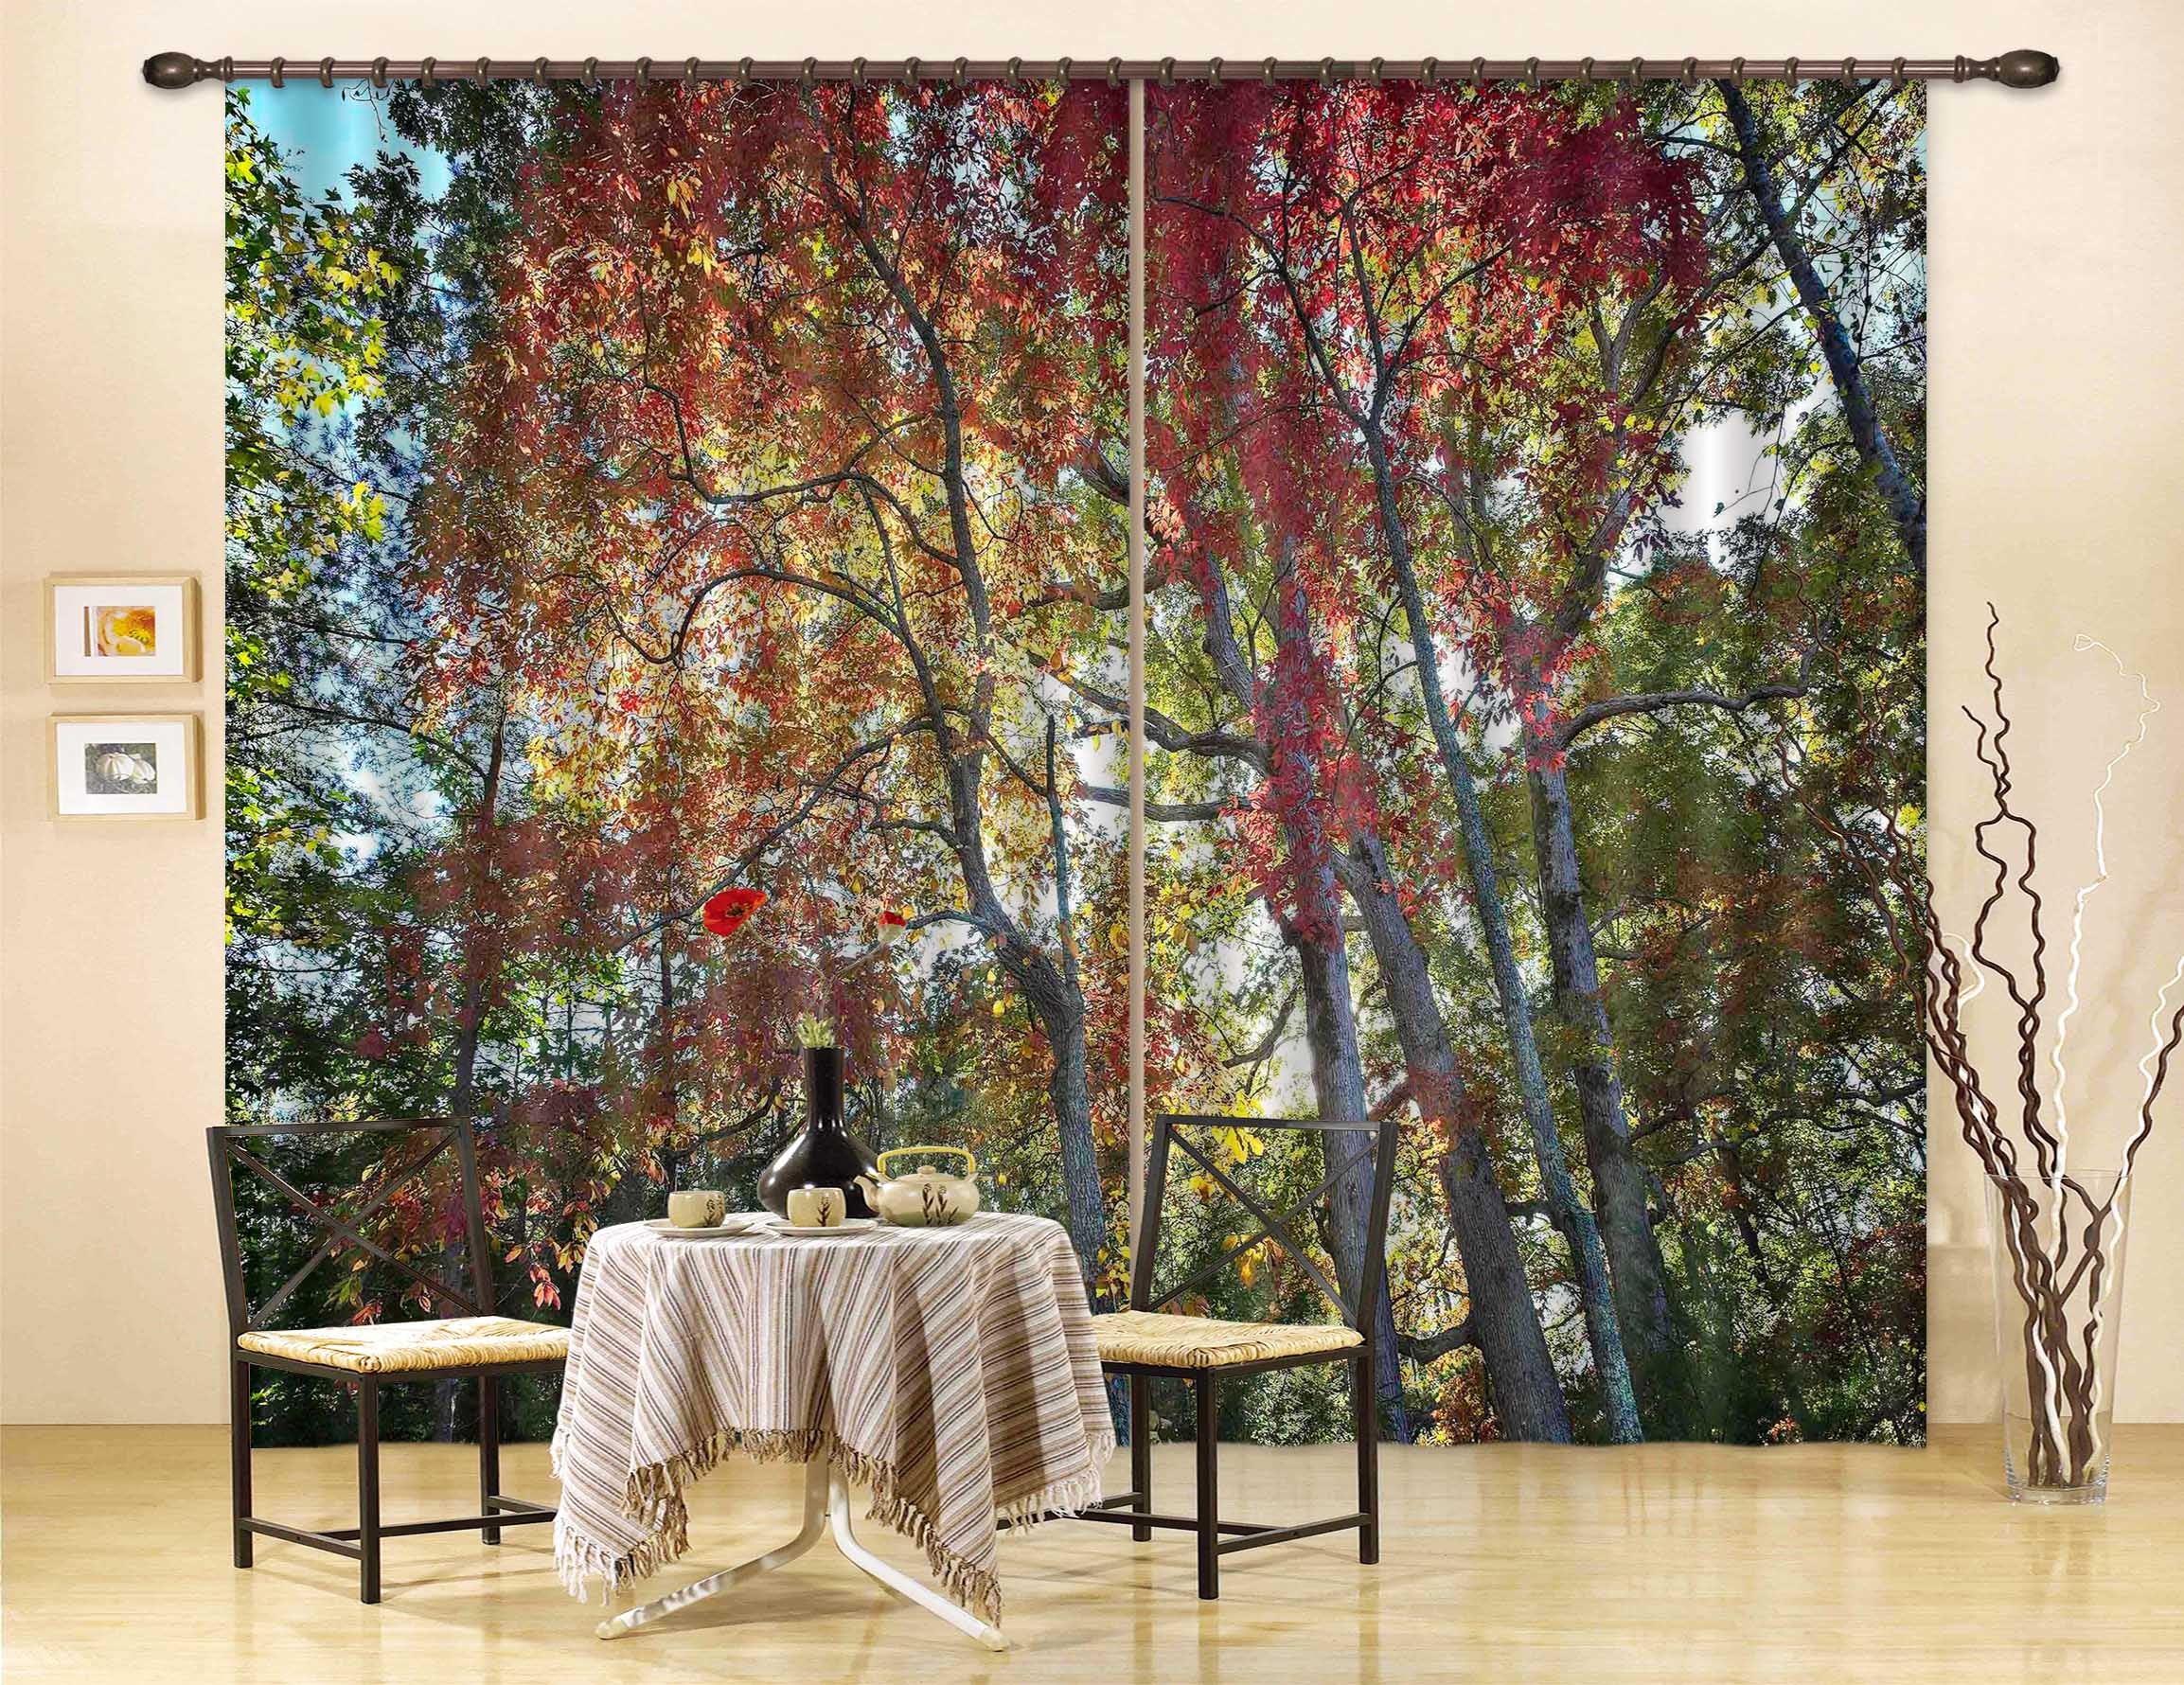 3D Natural Forest 063 Kathy Barefield Curtain Curtains Drapes